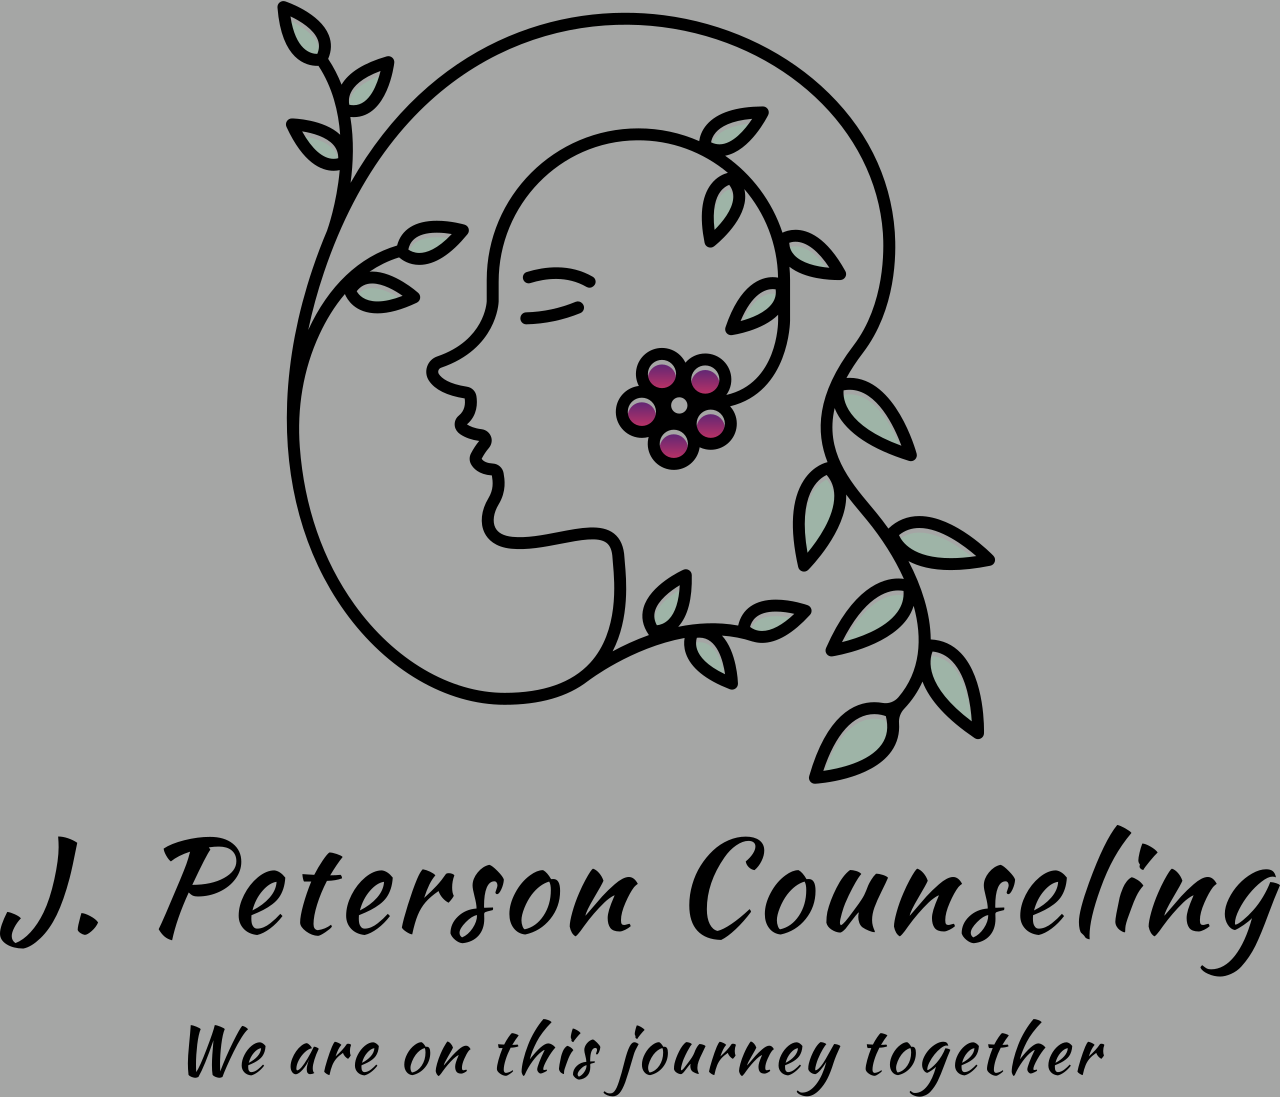 J. Peterson Counseling 's web page